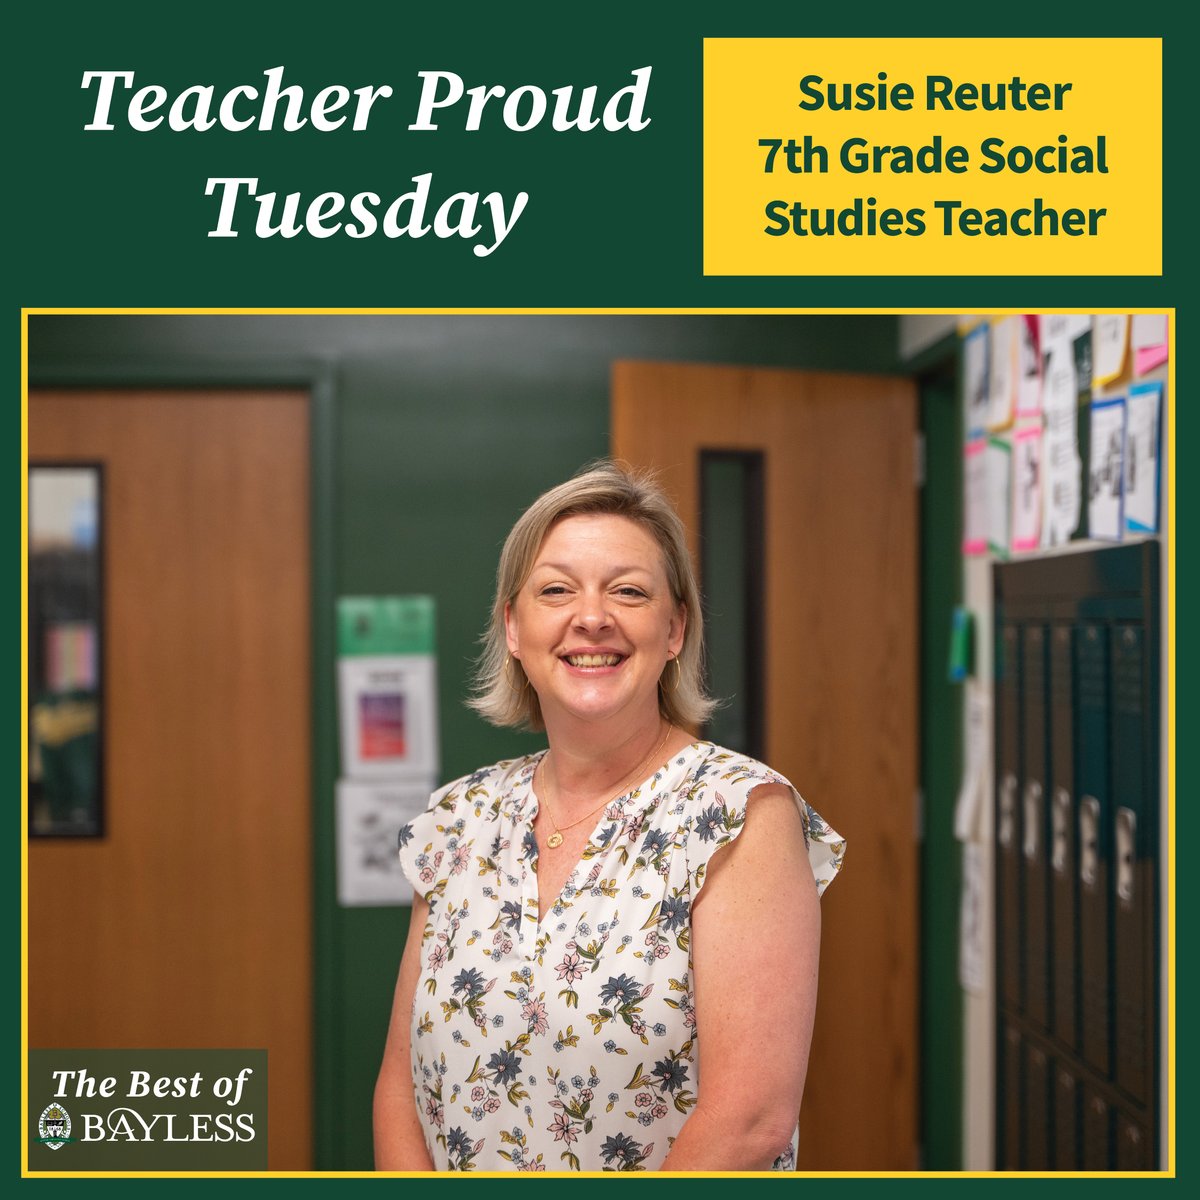 This #TeacherProudTuesday is for JH Social Studies Teacher Susie Reuter!

Ms. Reuter does a great job supporting students. She often takes her own time to talk with them about how she can best help. This has made a significant impact on many of her students! #BringTheStampede